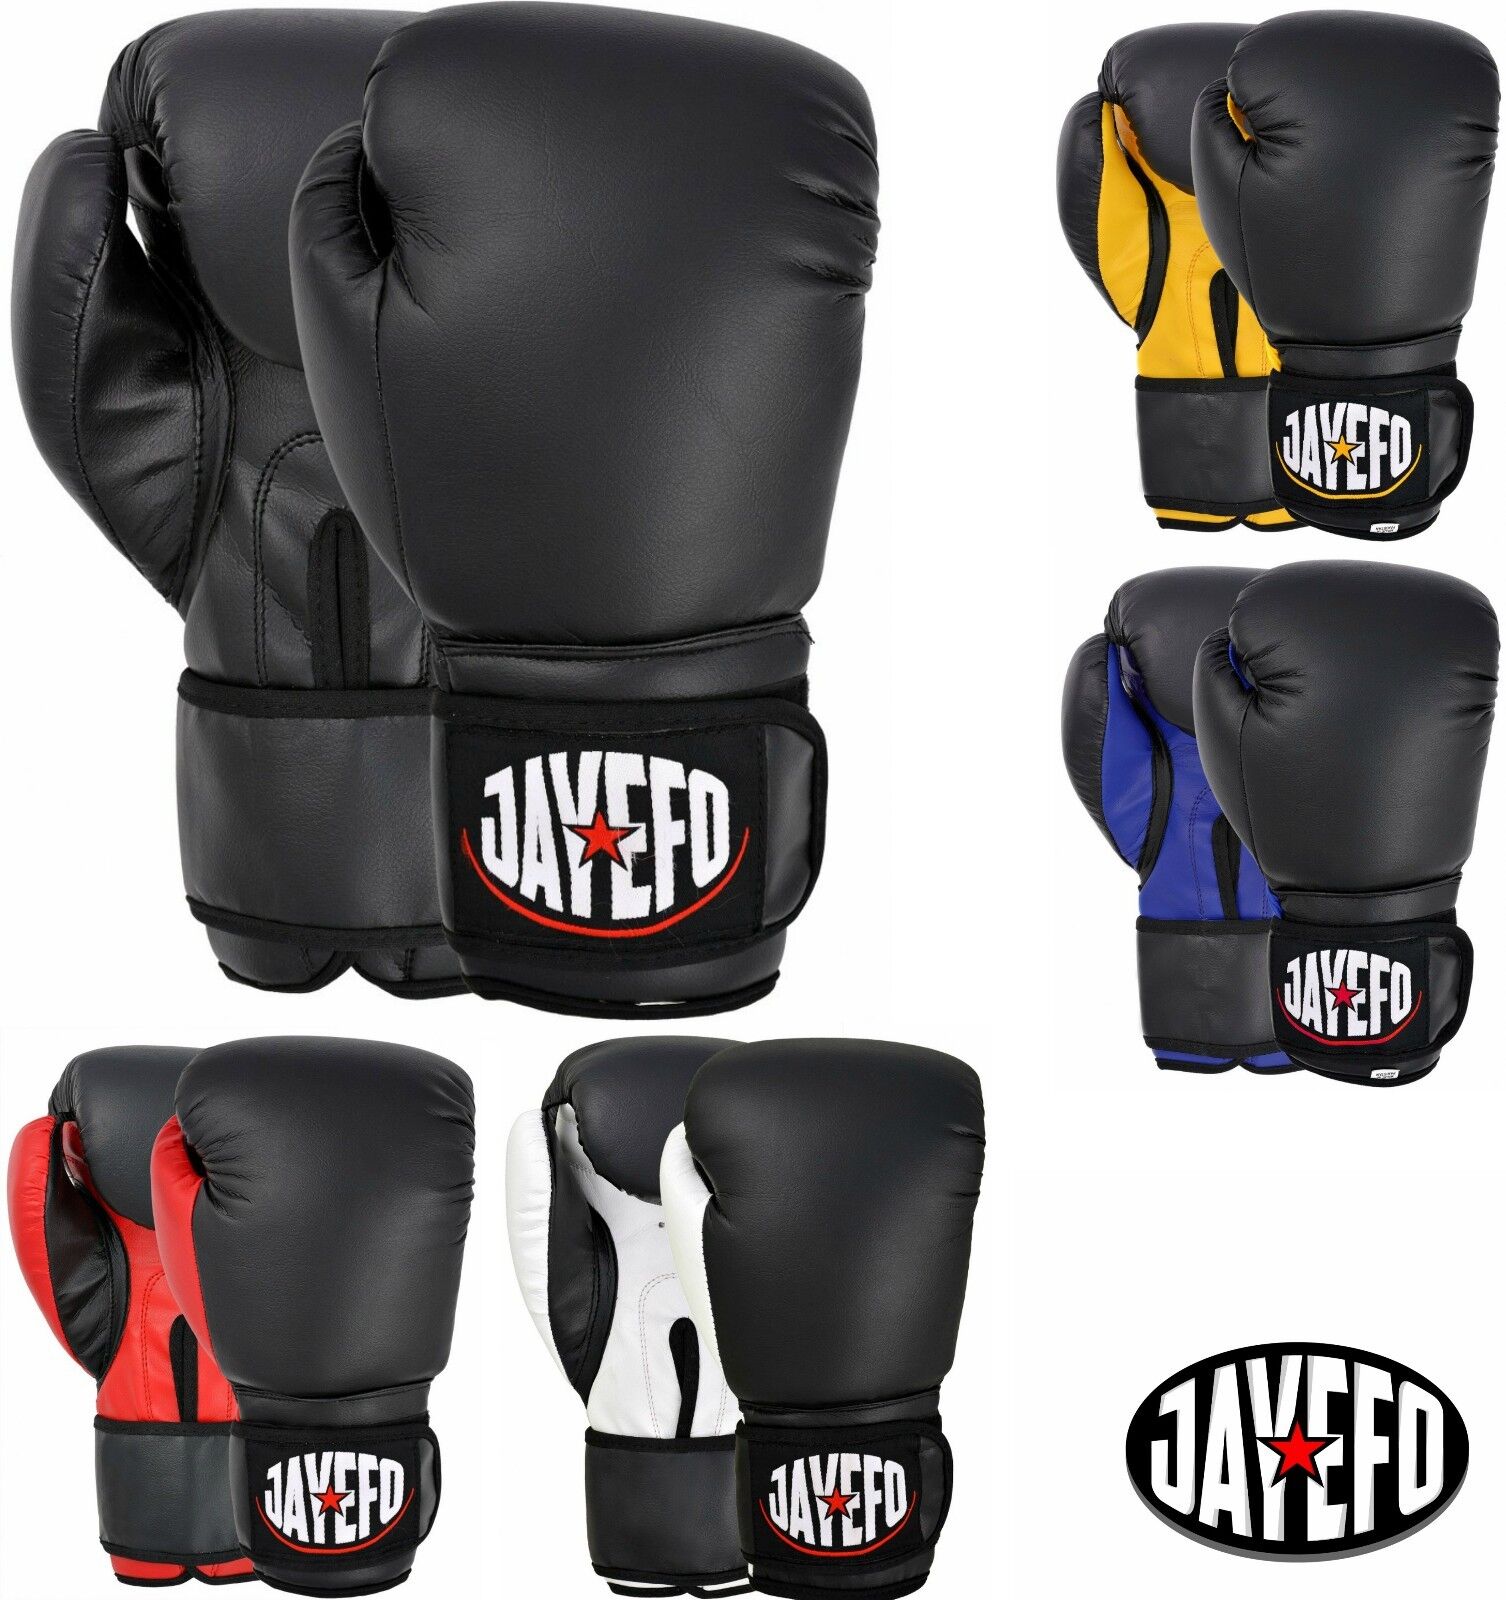 JAYEFO ® BEGINNERS LEATHER BOXING MMA MUAY THAI KICK BOXING SPARRING GLOVES MMA jayefo Does Not Apply